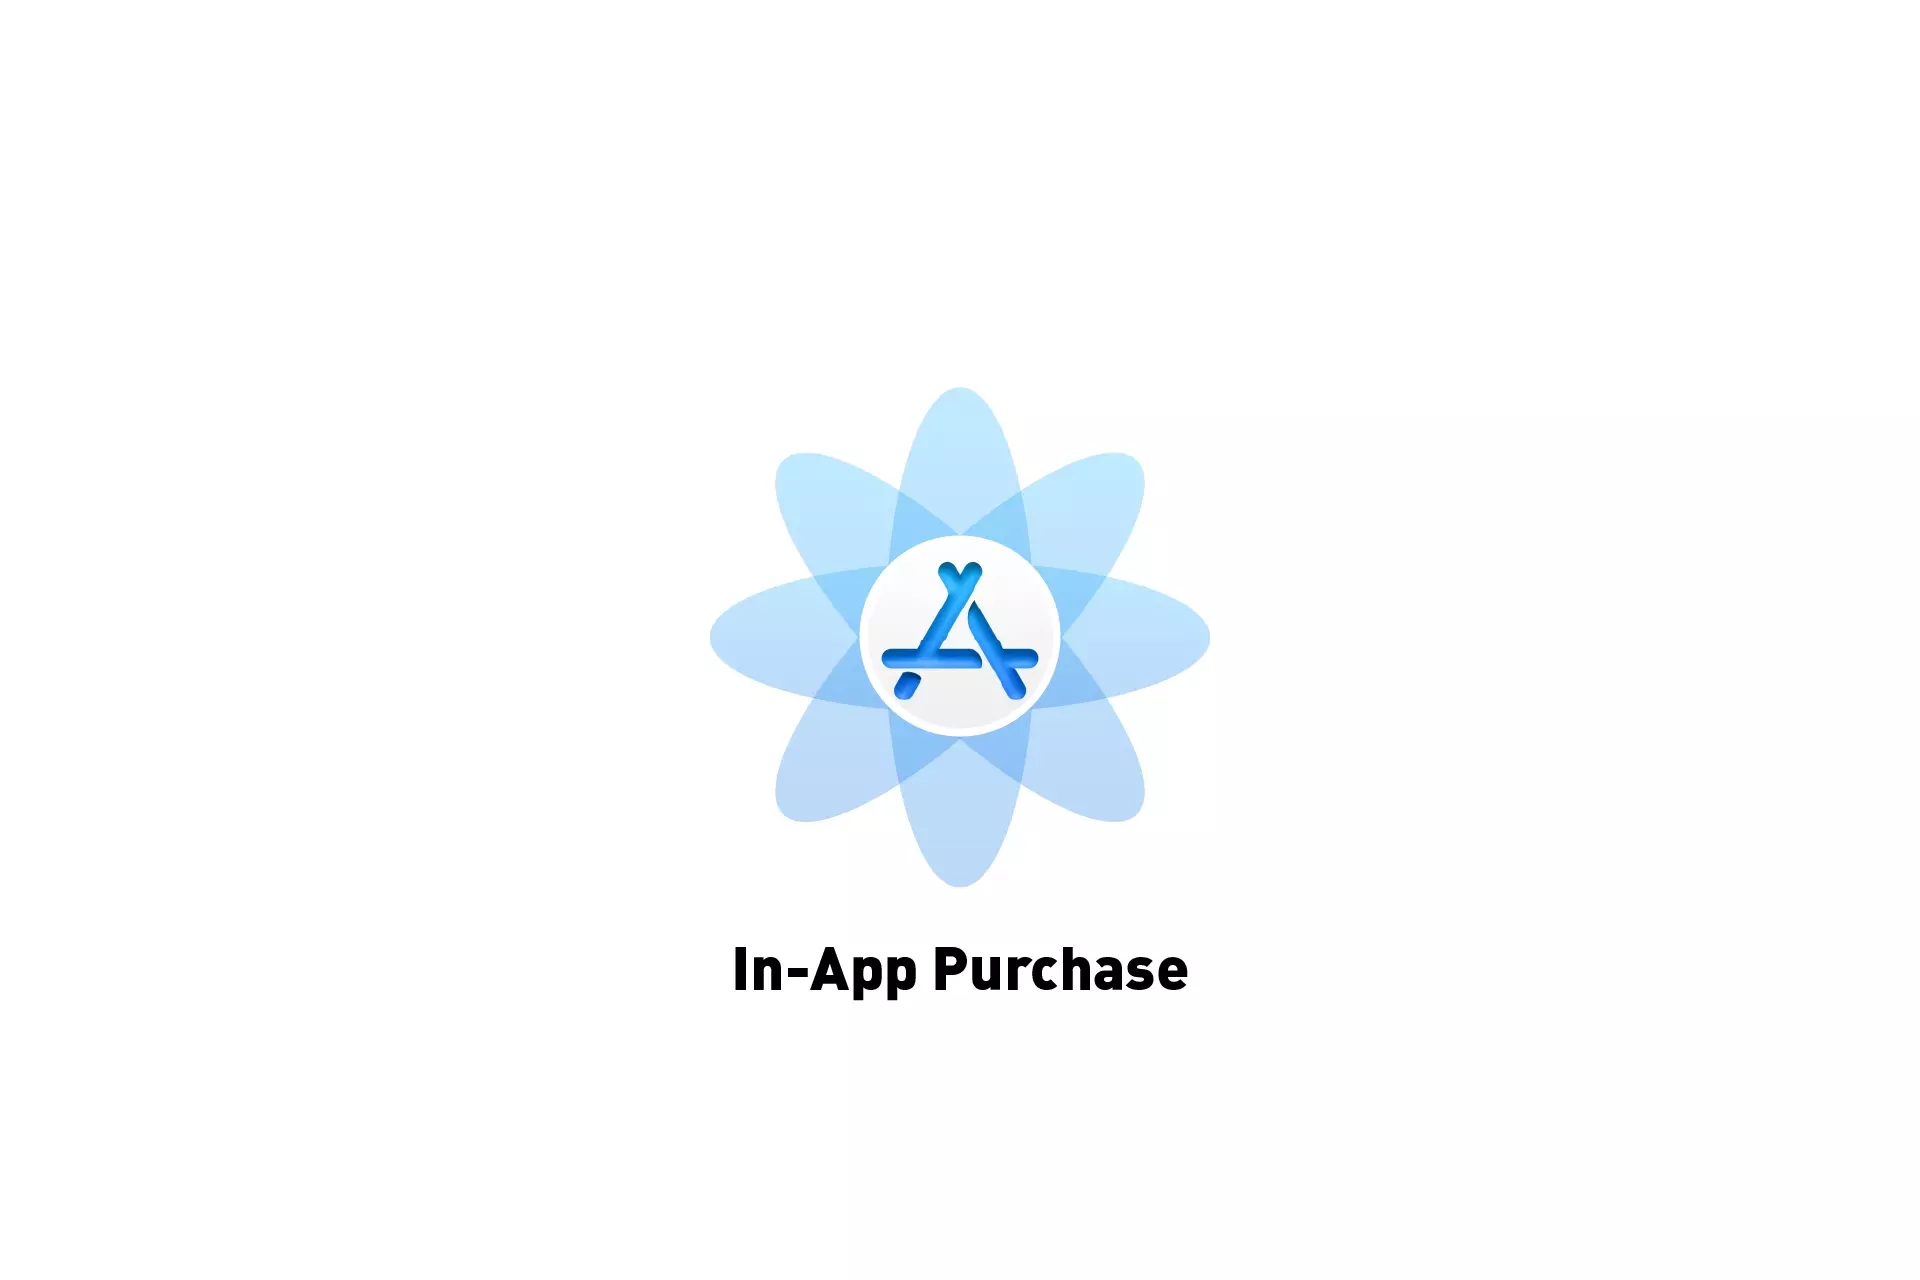 A flower that represents App Store Connect with the text "In-App Purchases" beneath it.